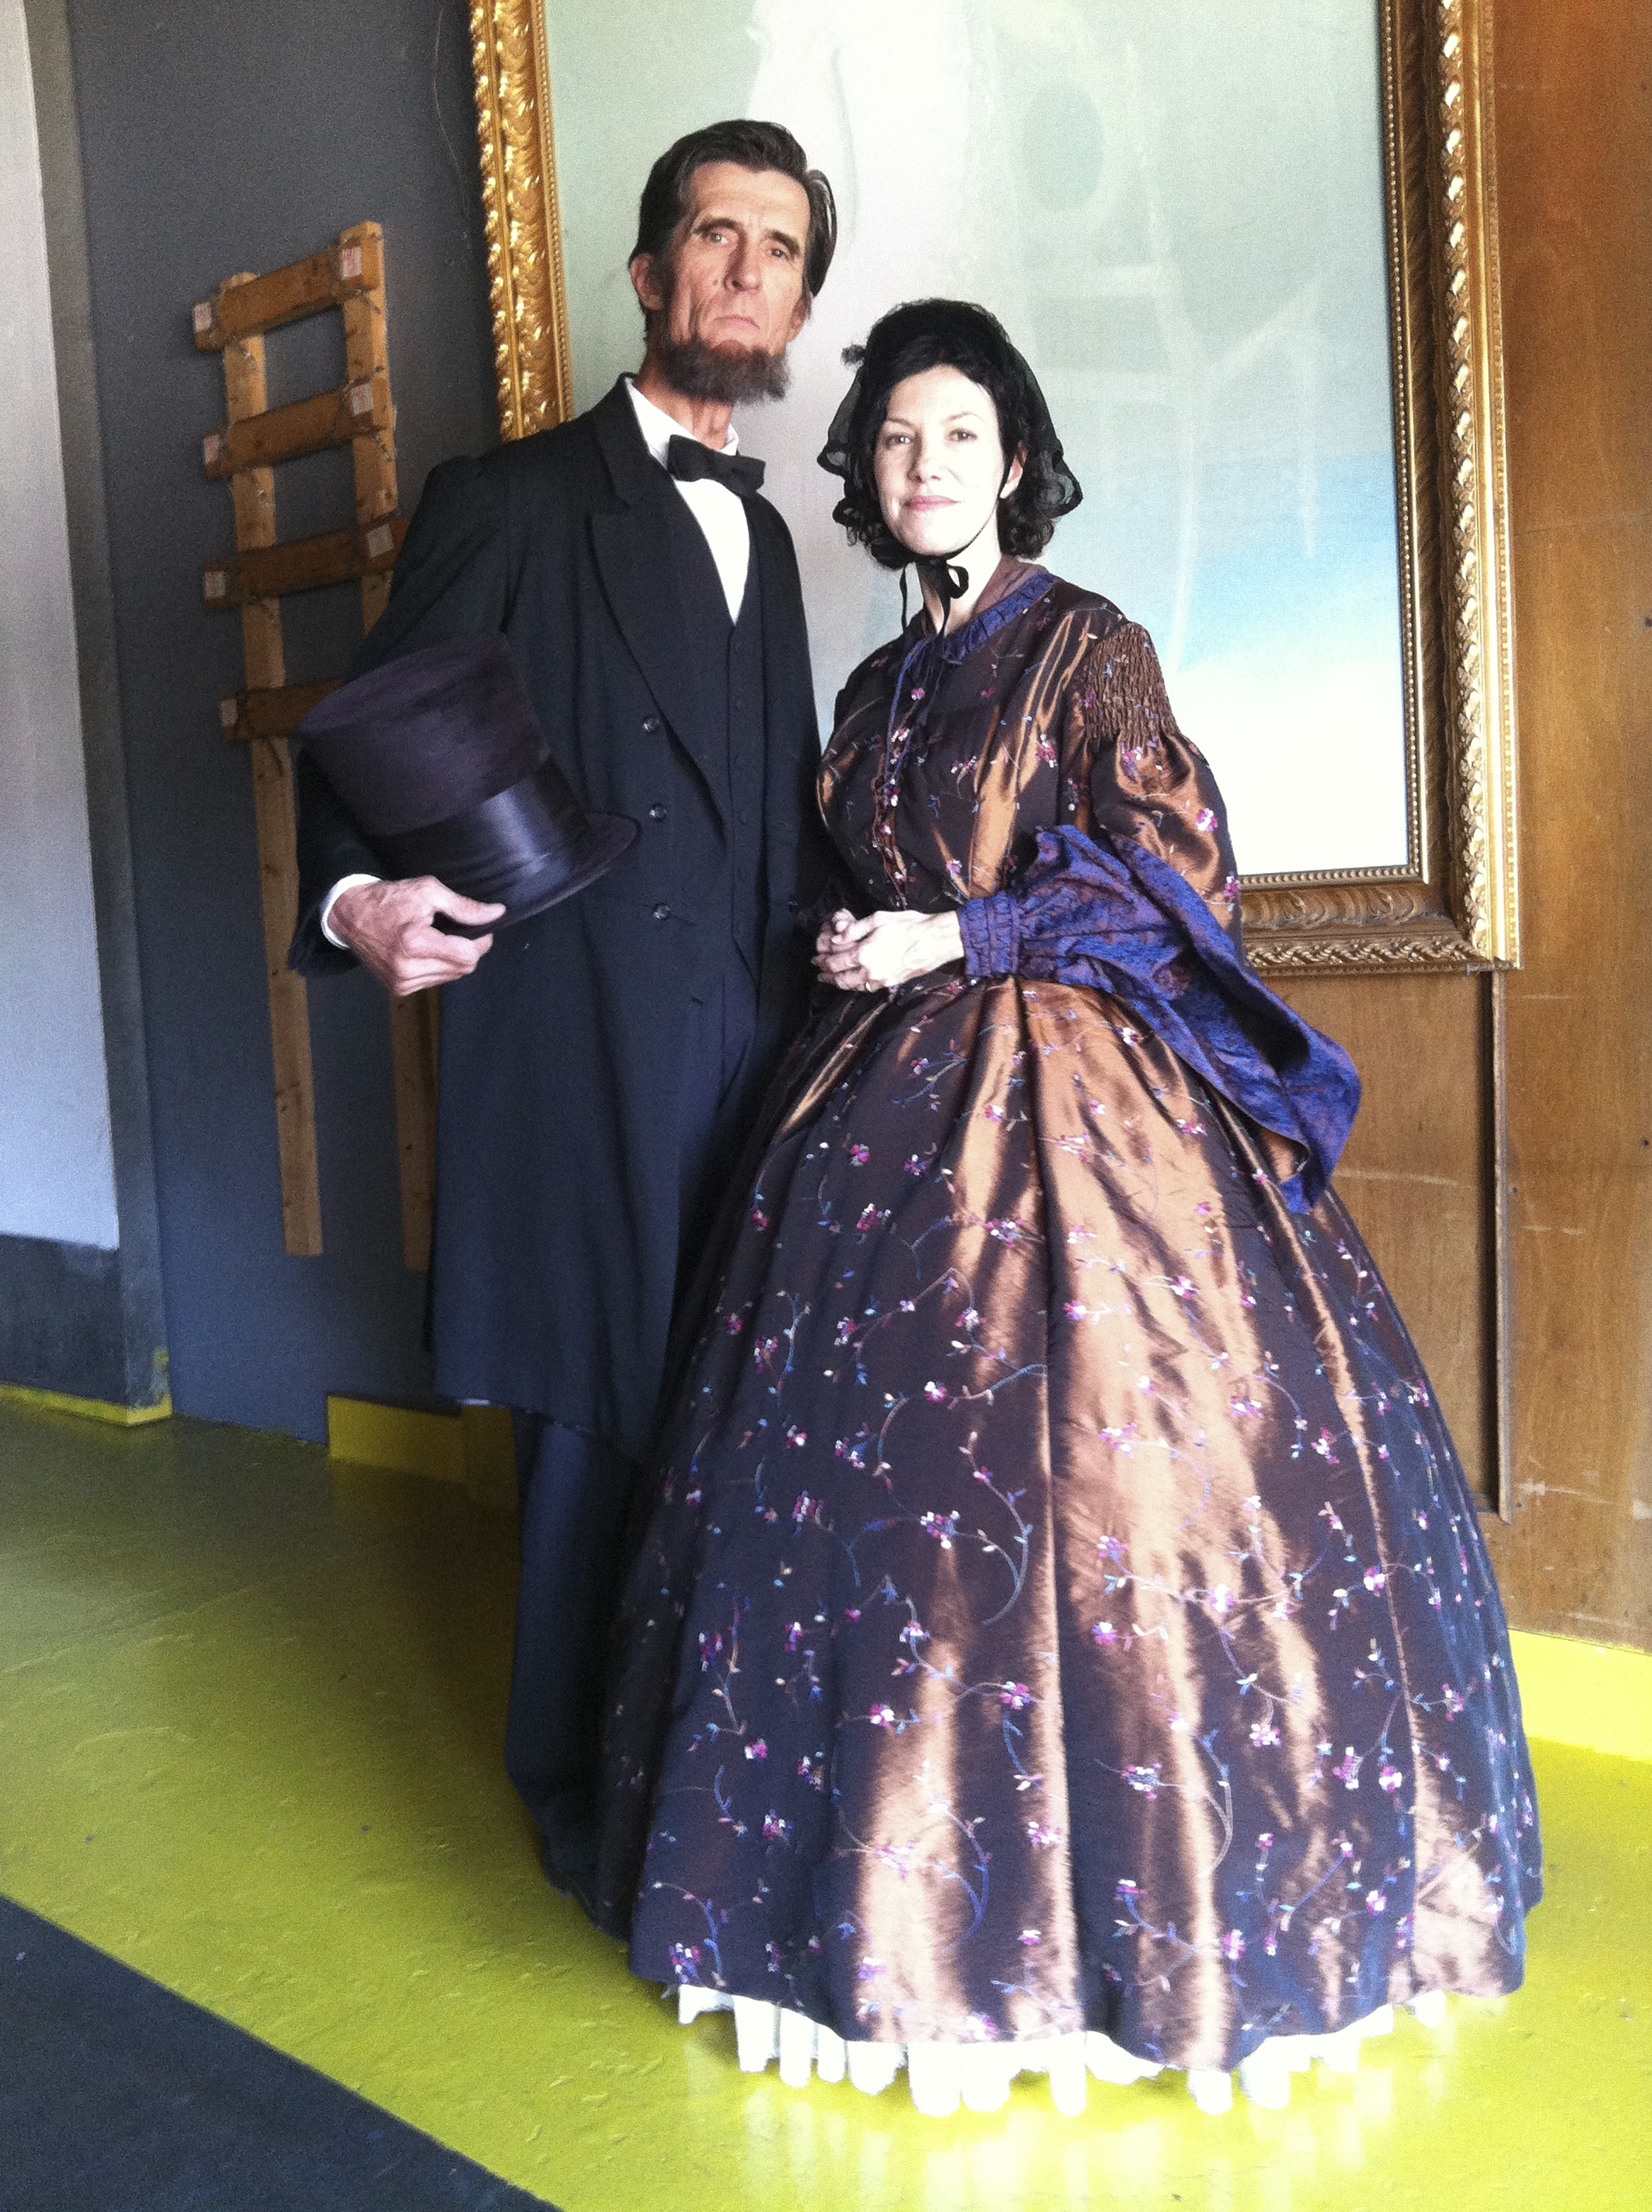 Elizabeth Rowin as Mary Todd Lincoln on the set of HOTEL SECRETS & LEGENDS.